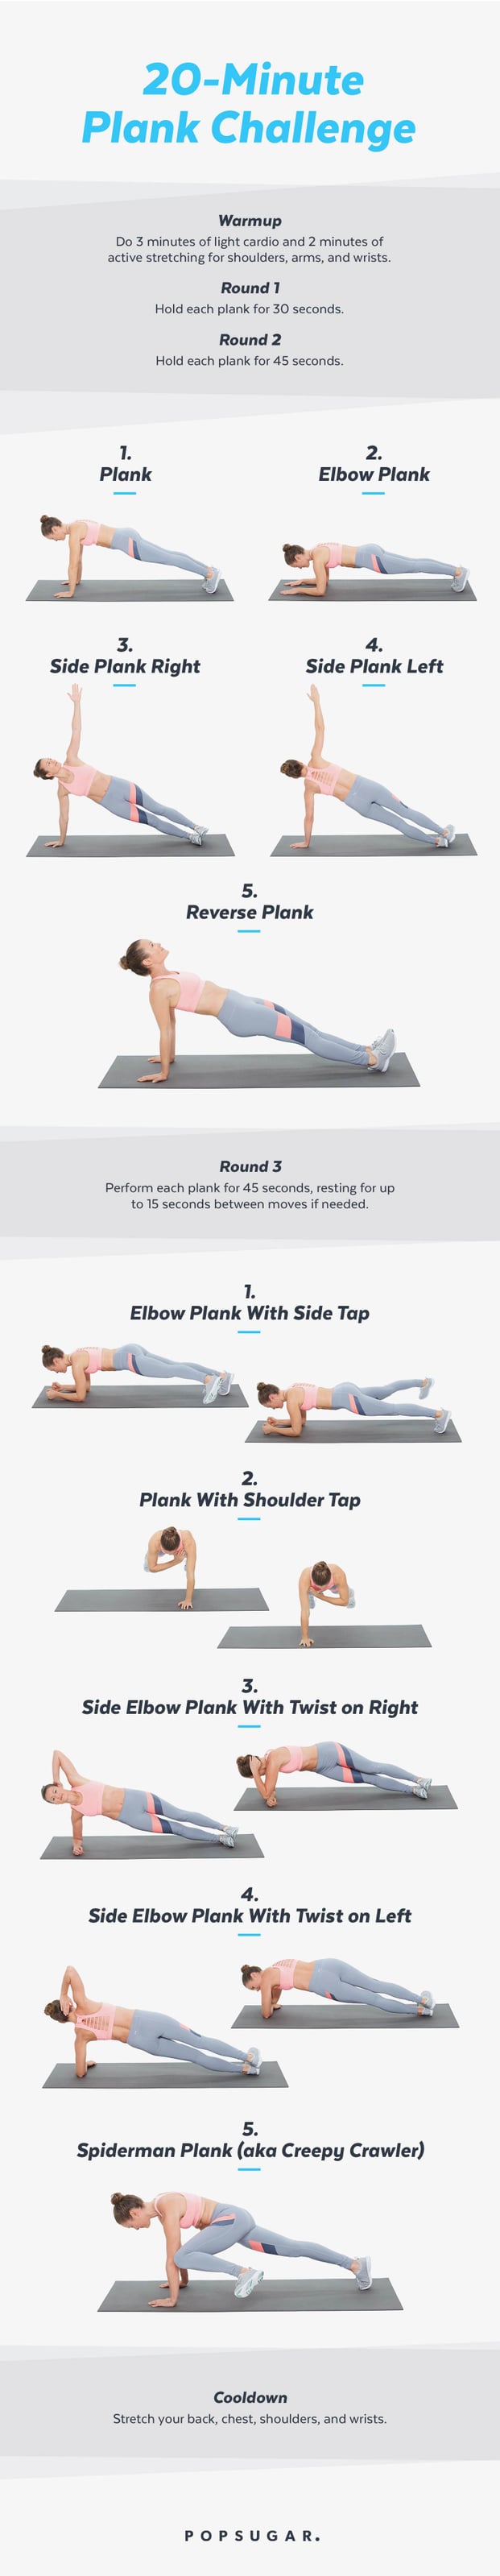 Plank Challenge For Arms and Abs